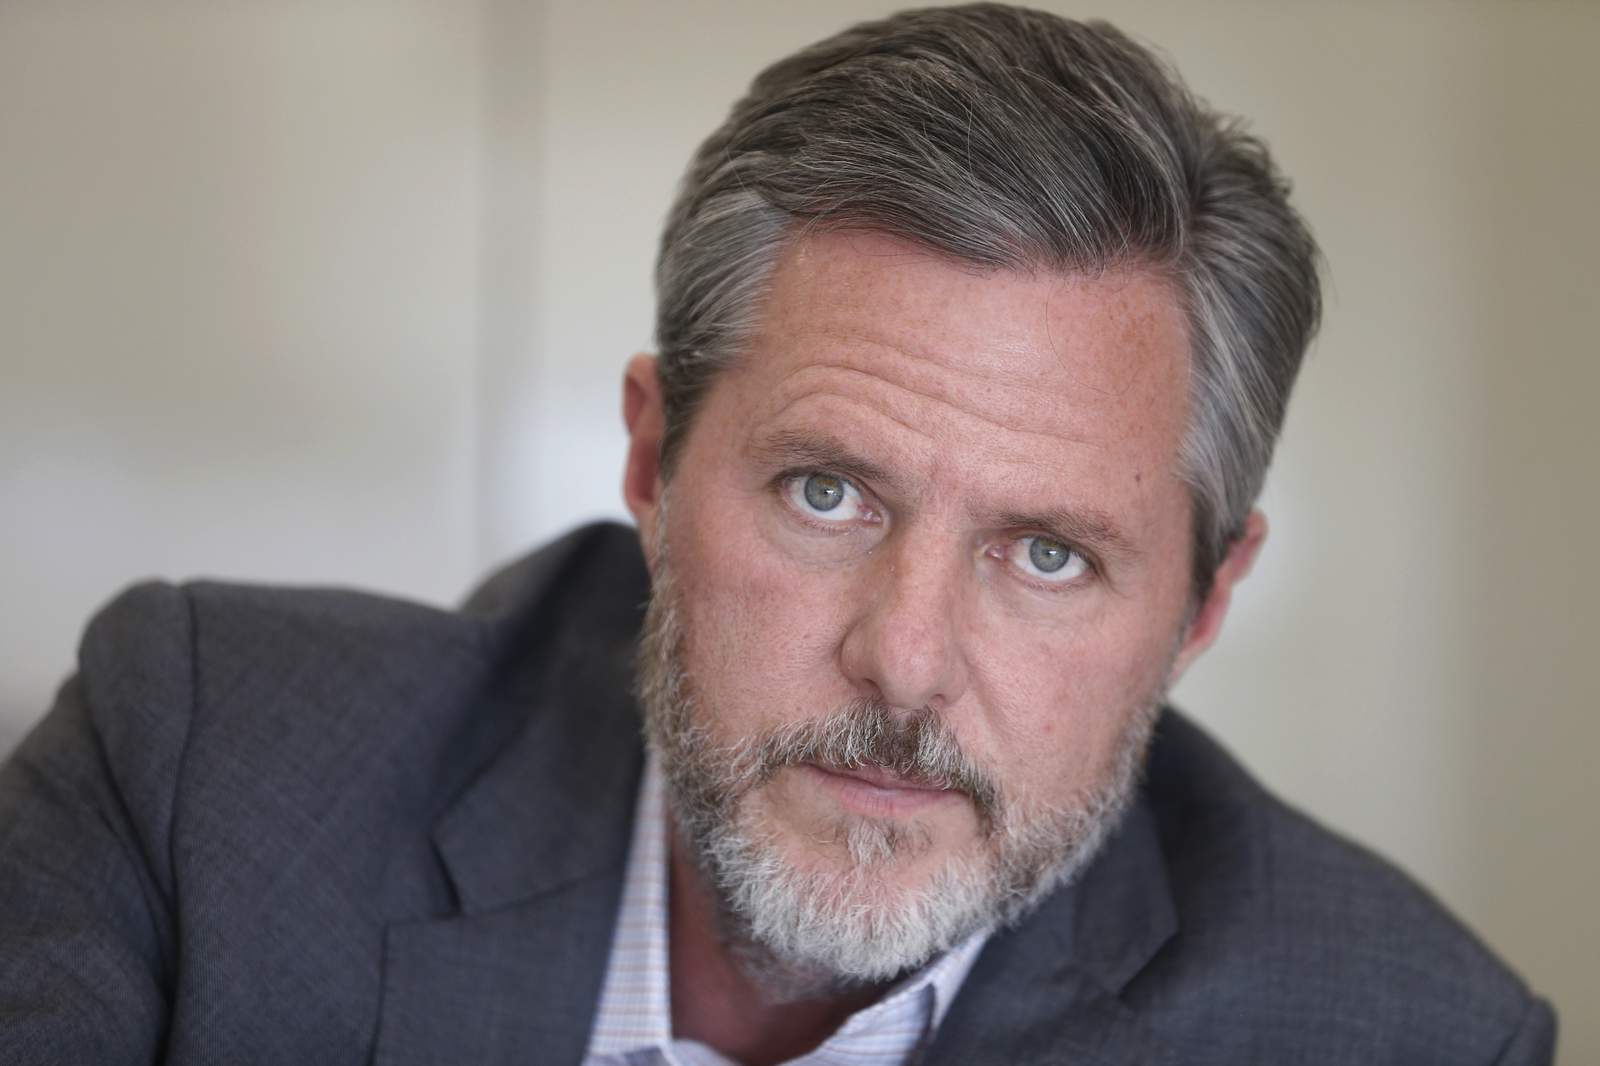 Falwell apologizes for tweet that included racist photo